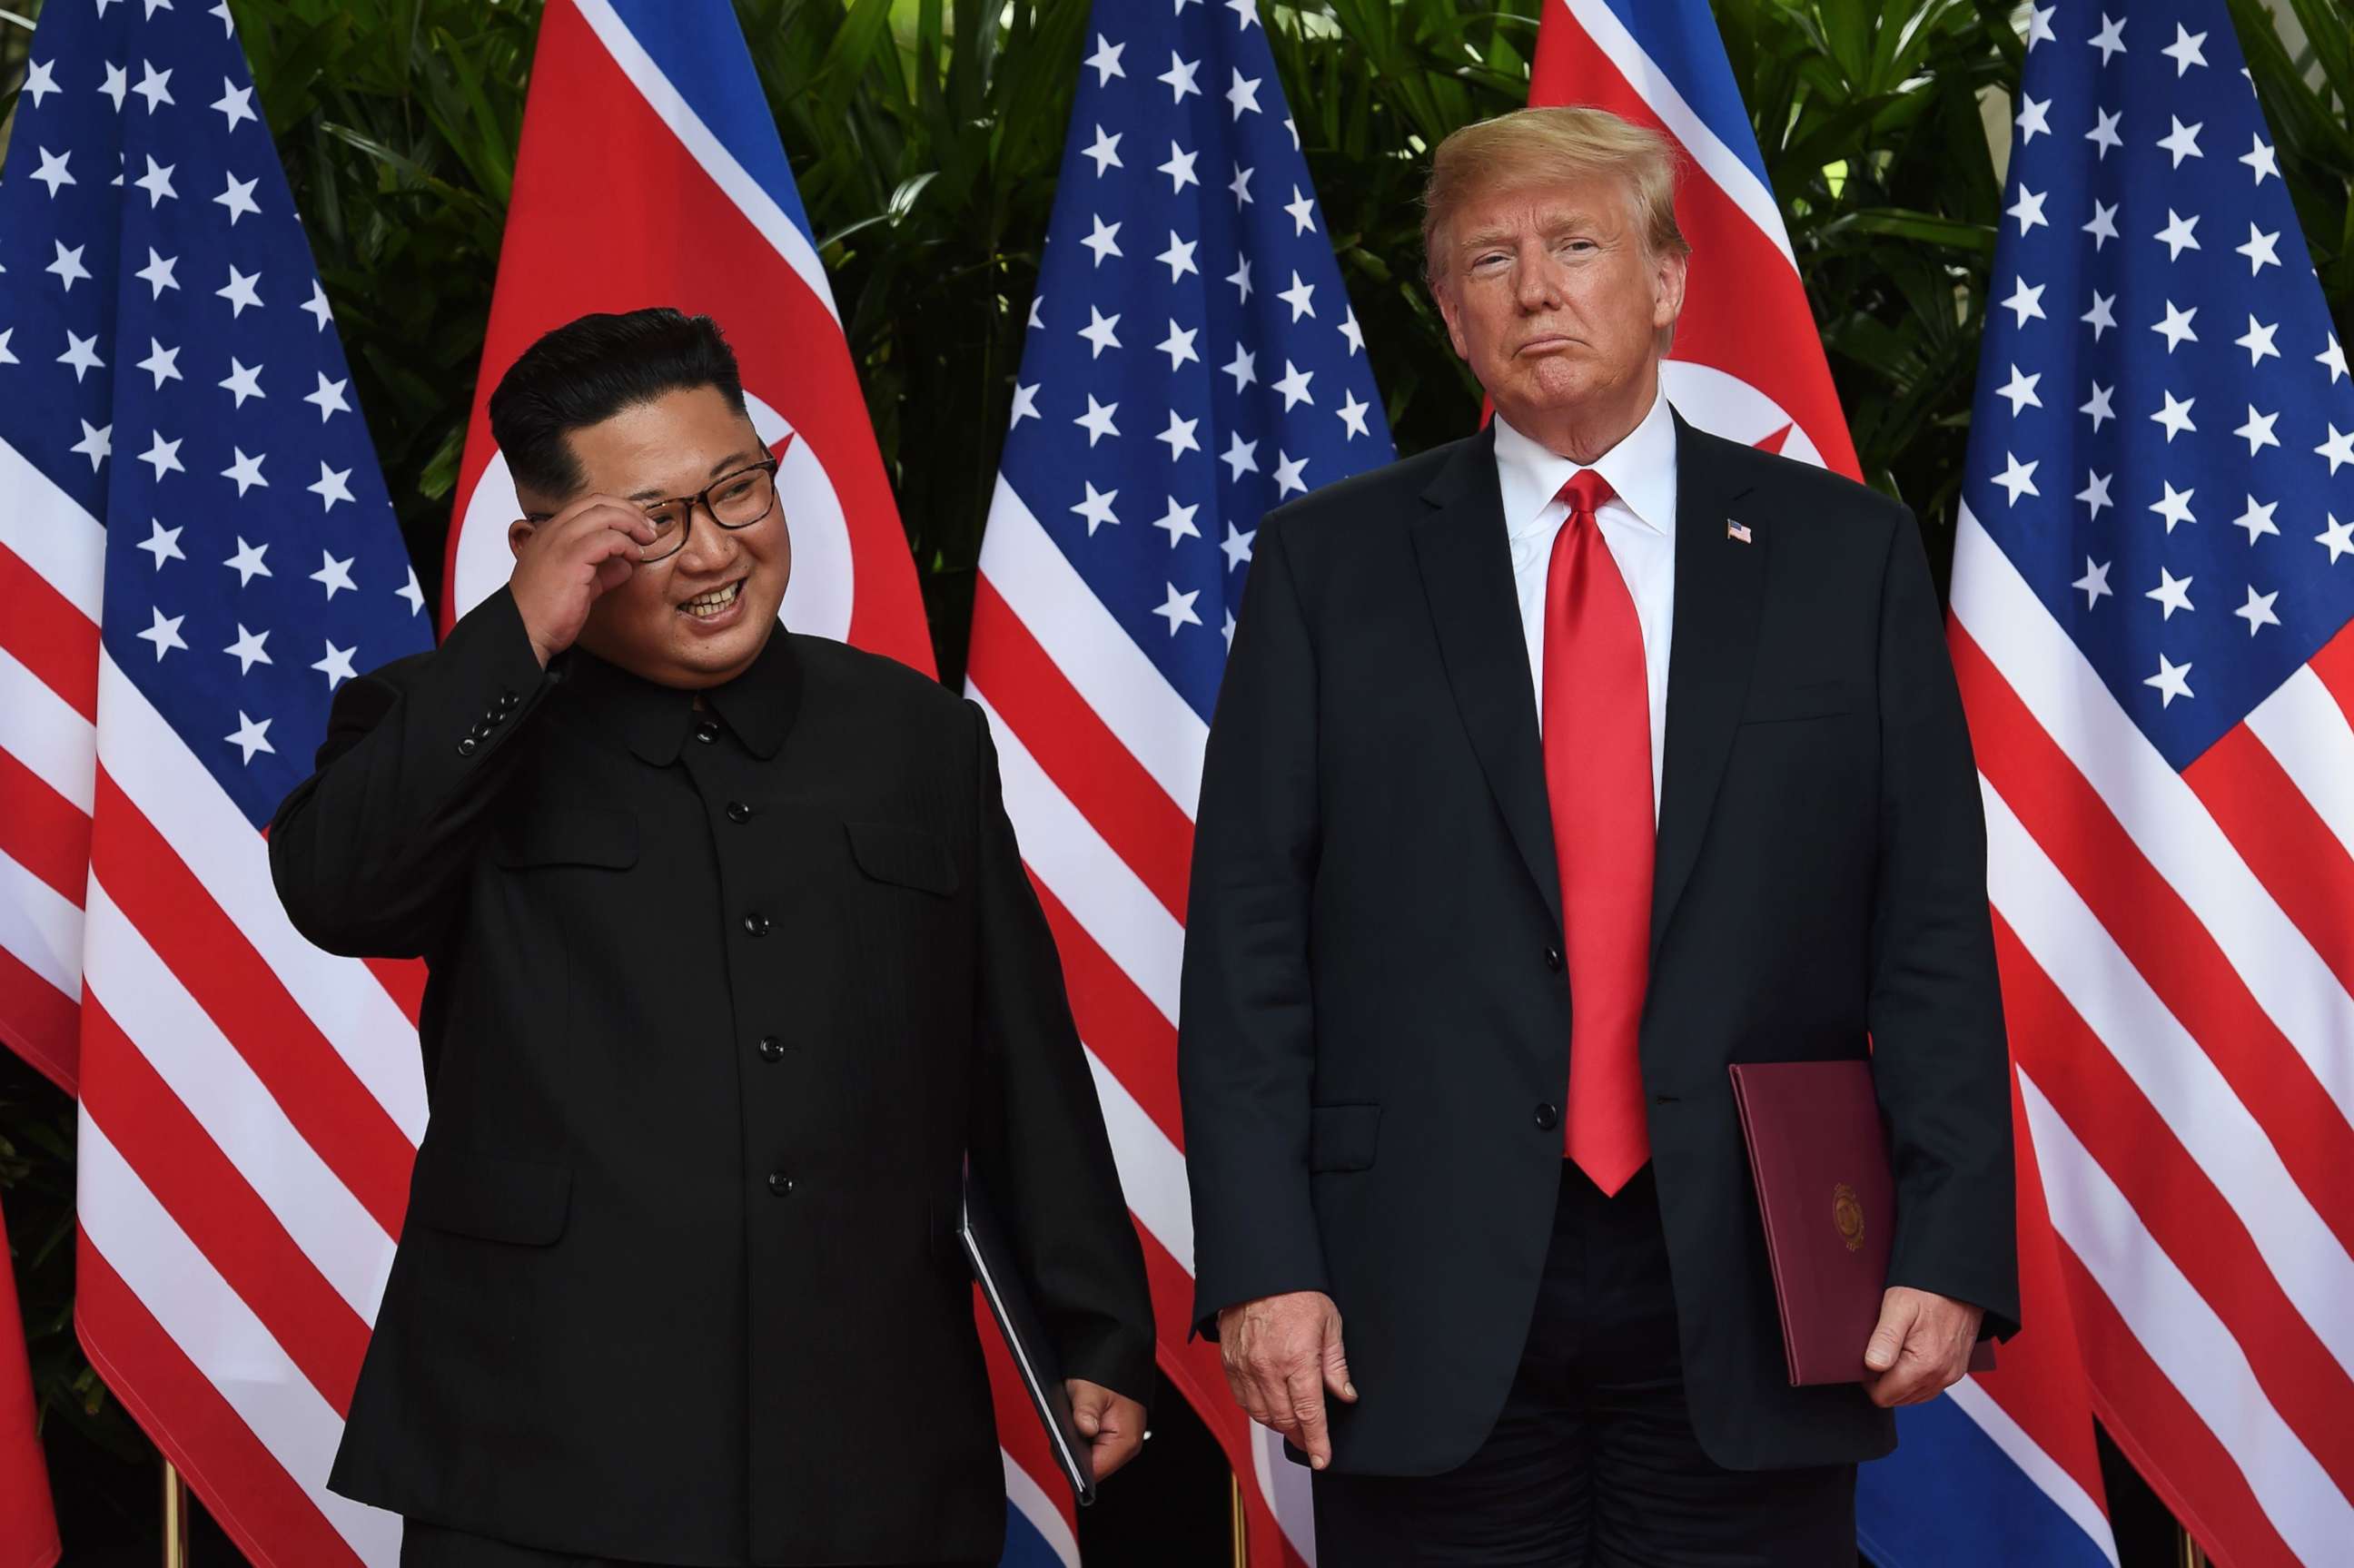 PHOTO: North Korea's leader Kim Jong Un smiles while posing with President Donald Trump after taking part in a signing ceremony at the end of their summit in Singapore, June 12, 2018.